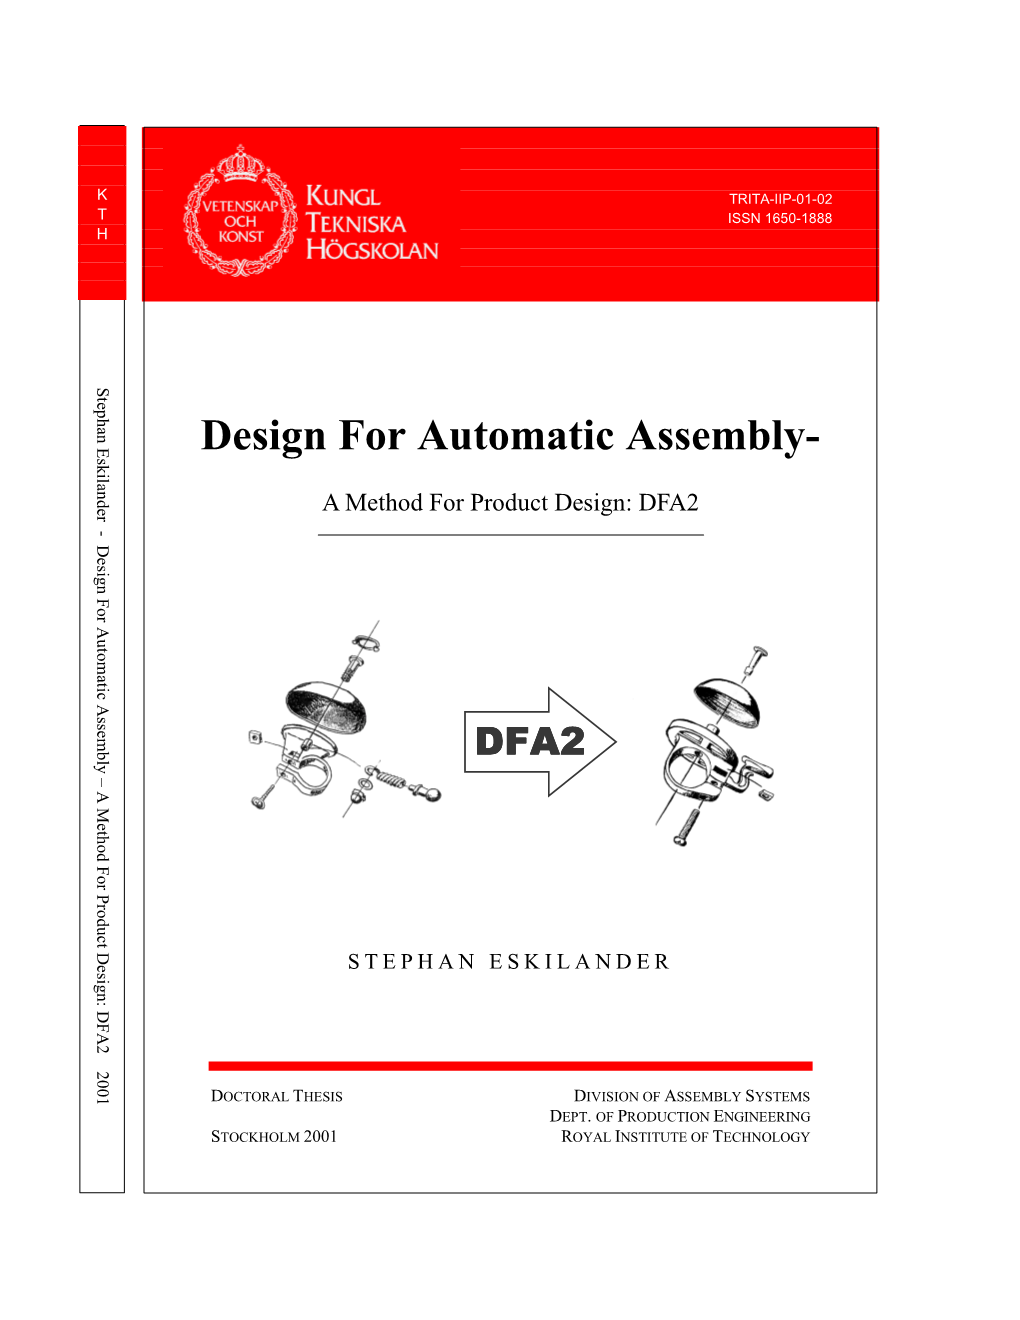 Design for Automatic Assembly